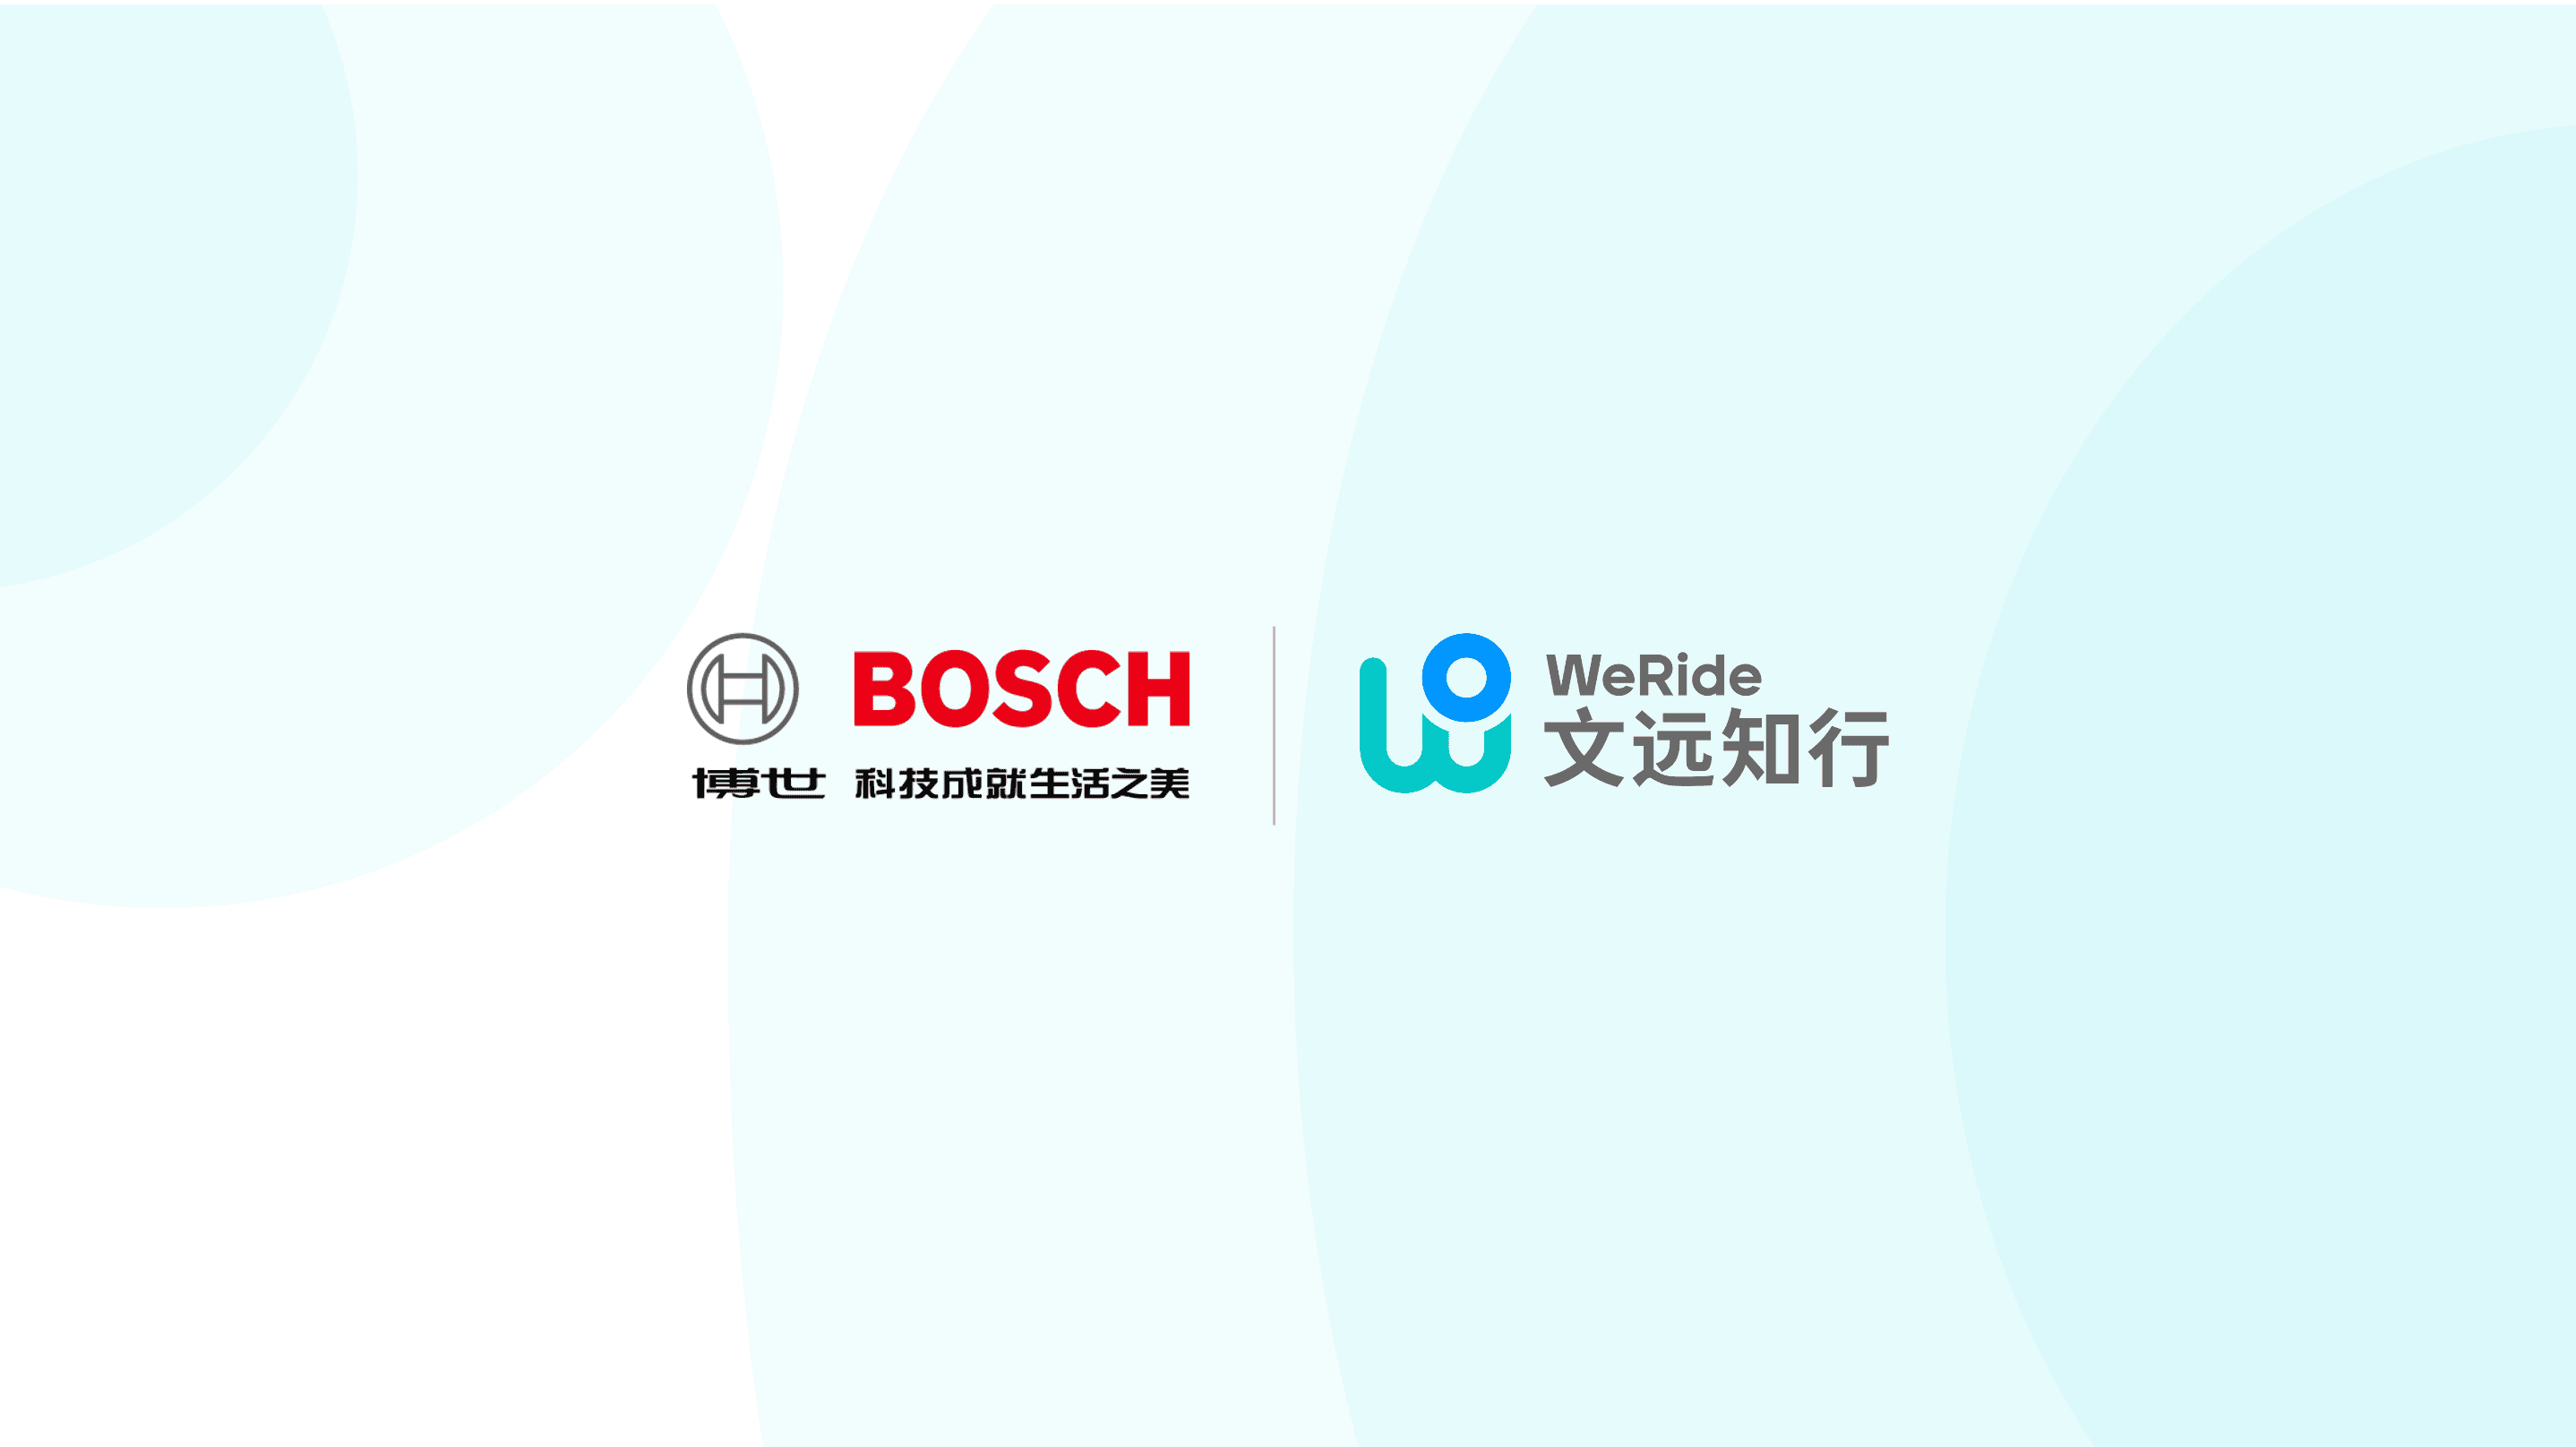 WeRide received strategic investment from Bosch    to jointly develop the auto grade and mass production of advanced driving solution in China